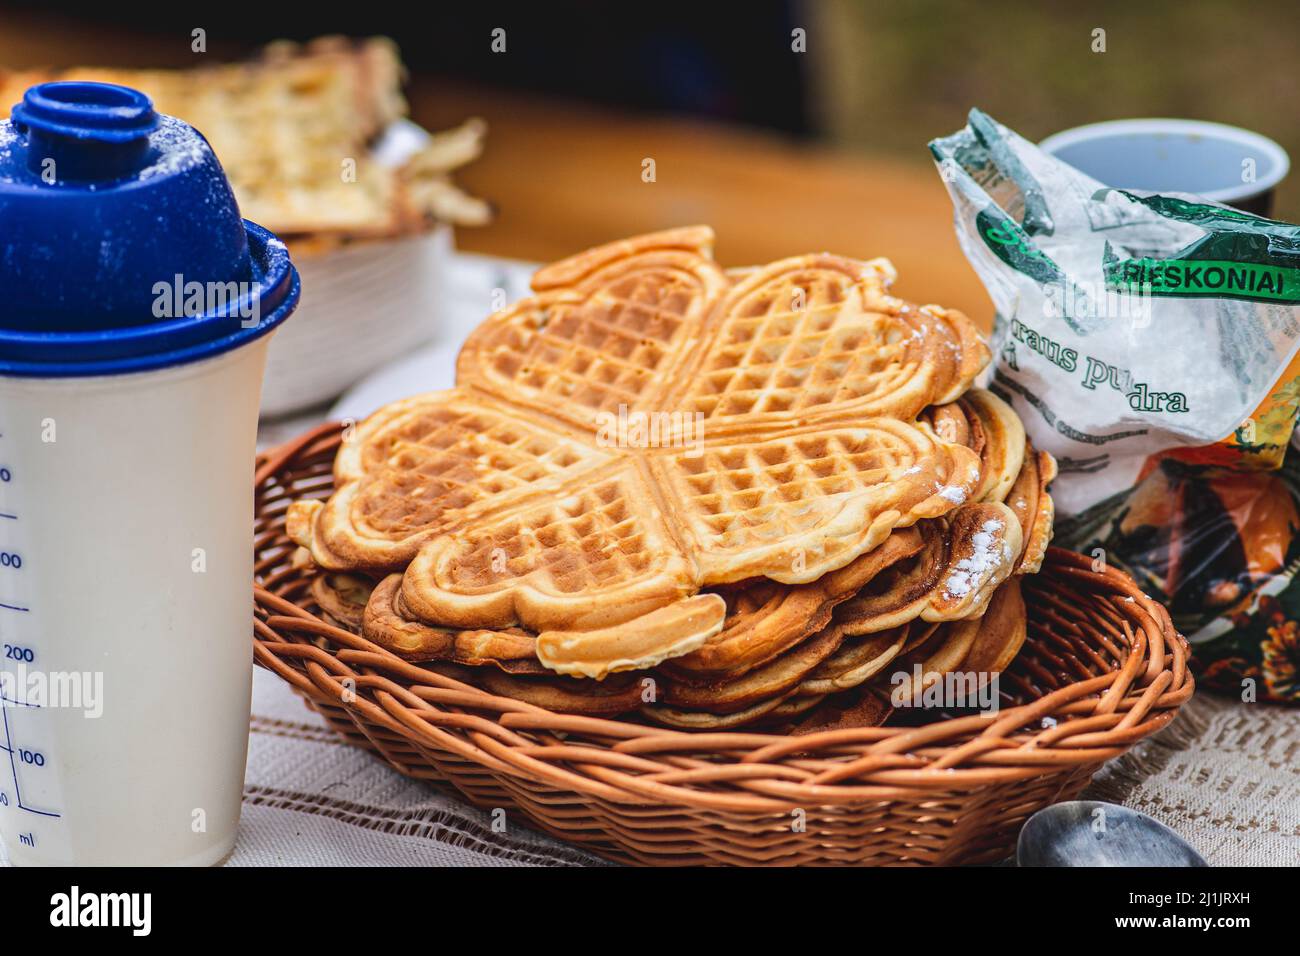 Waffle or waffles in a wicker basket, dish made from leavened batter or dough that is cooked between two plates that are patterned Stock Photo